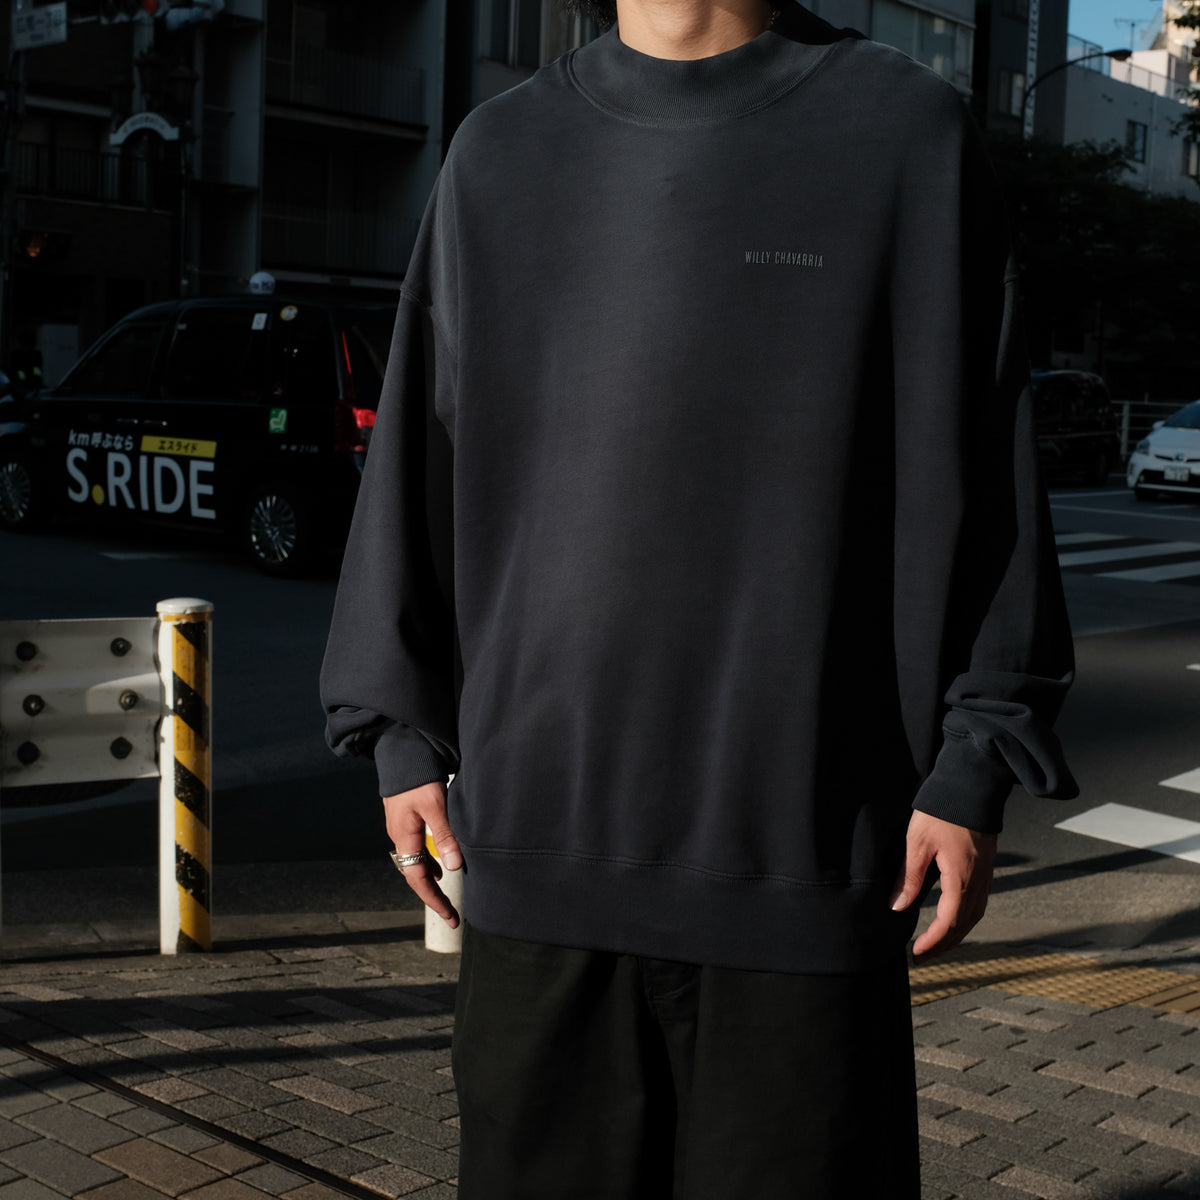 WILLY CHAVARRIA / MOCK NECK SWEAT CHEMICAL BLACK